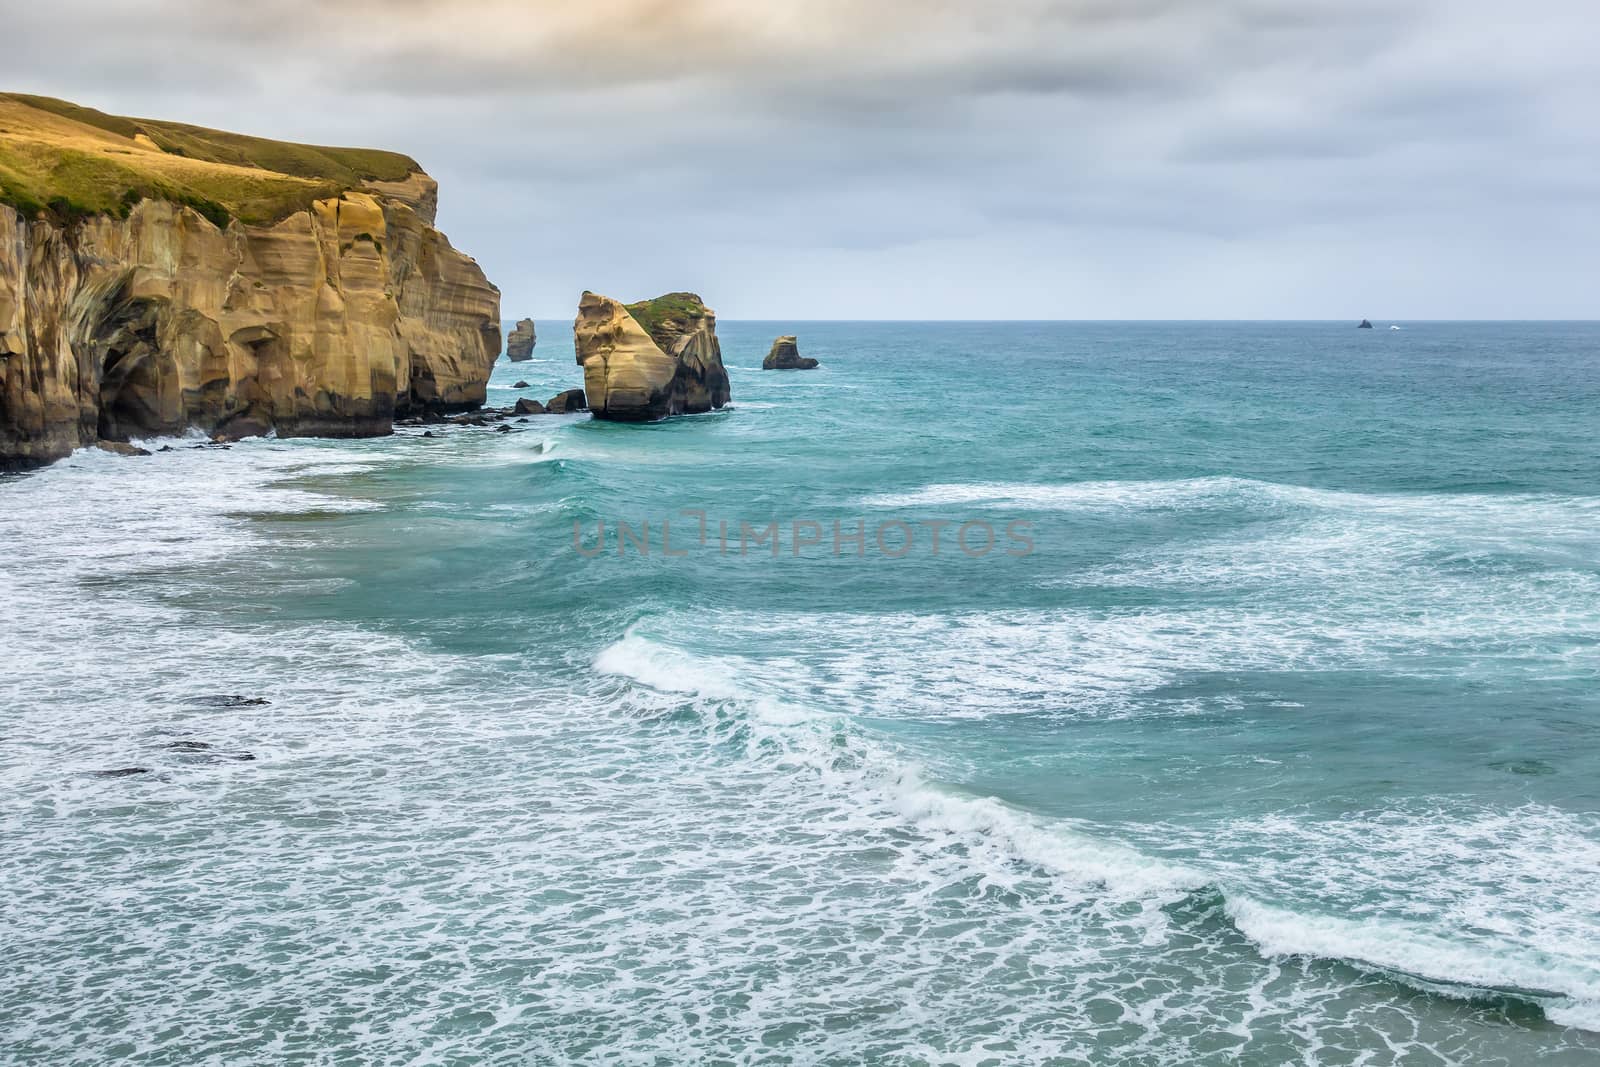 An image of the Tunnel Beach in New Zealand